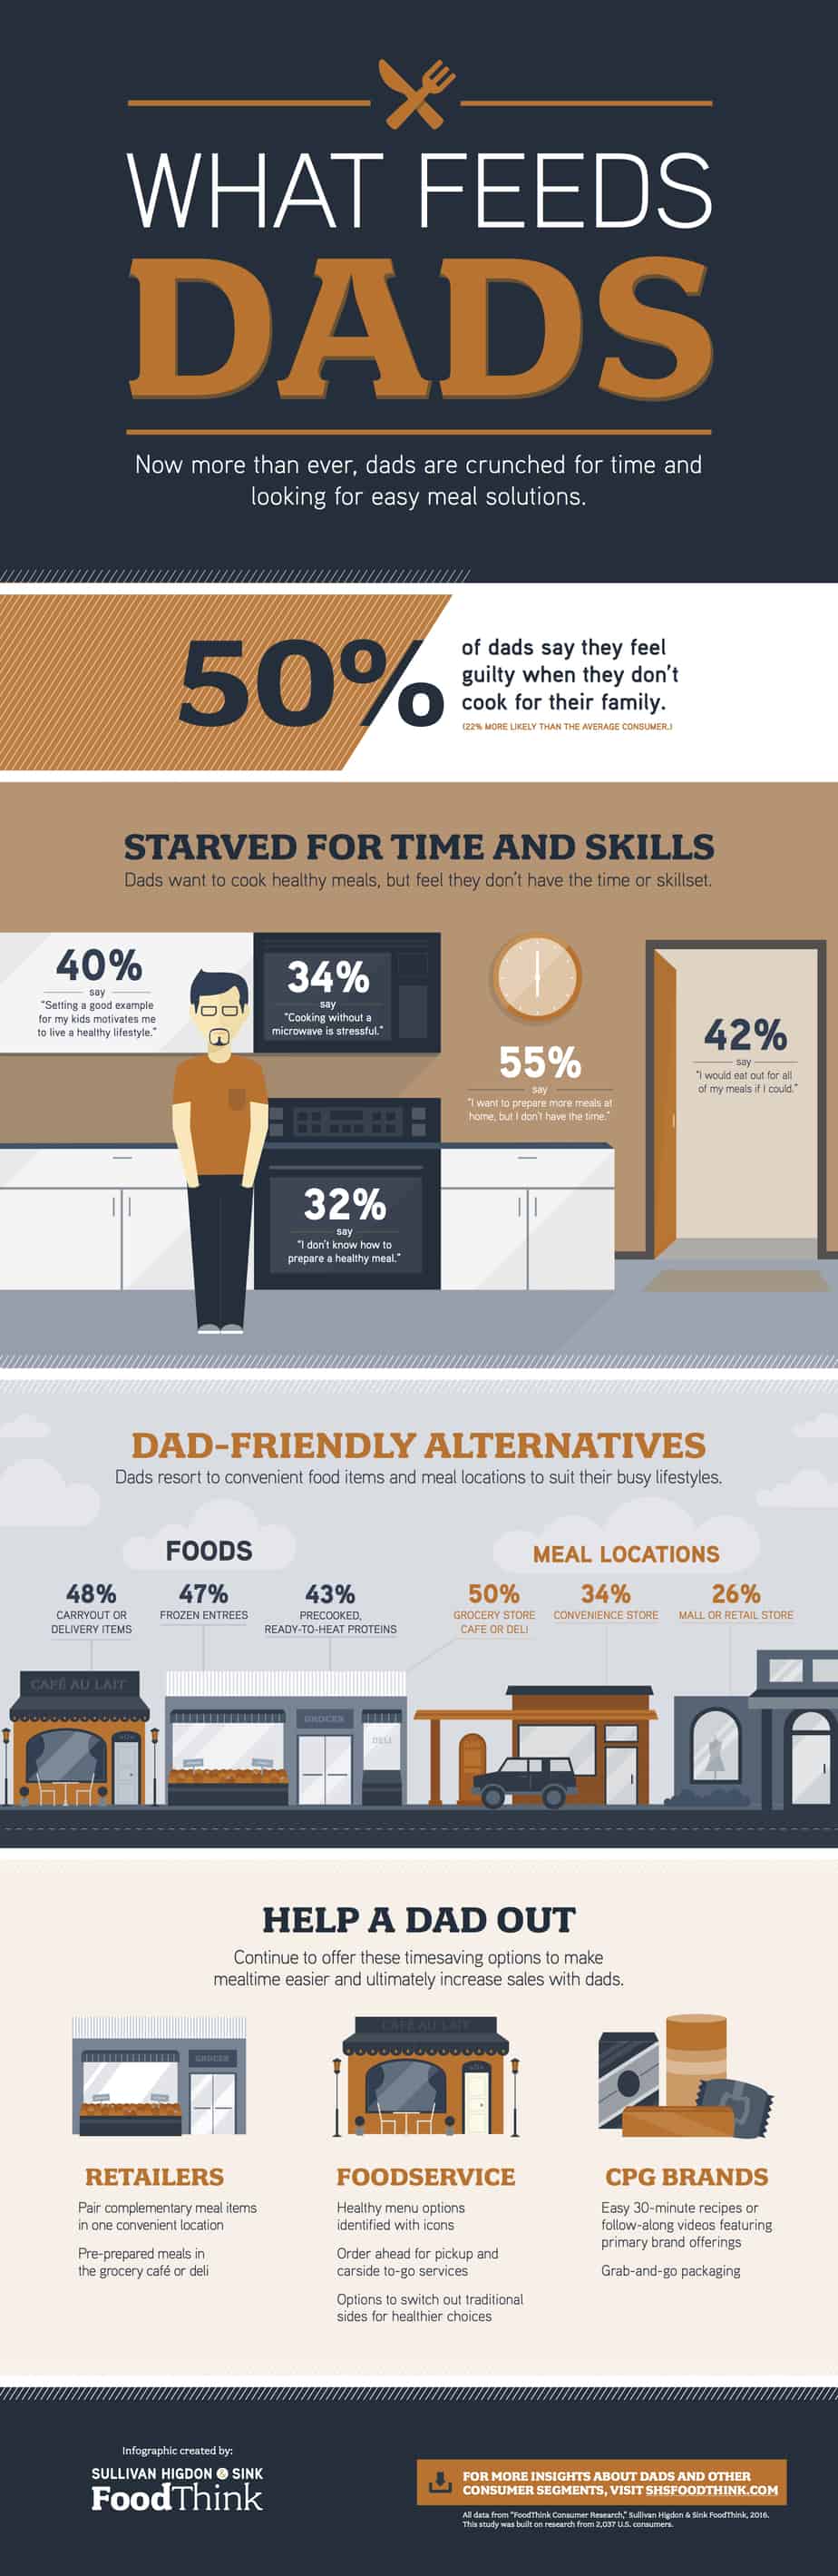 Featured image for “Dads Want to Fix Fast Healthy Meals for Kids”